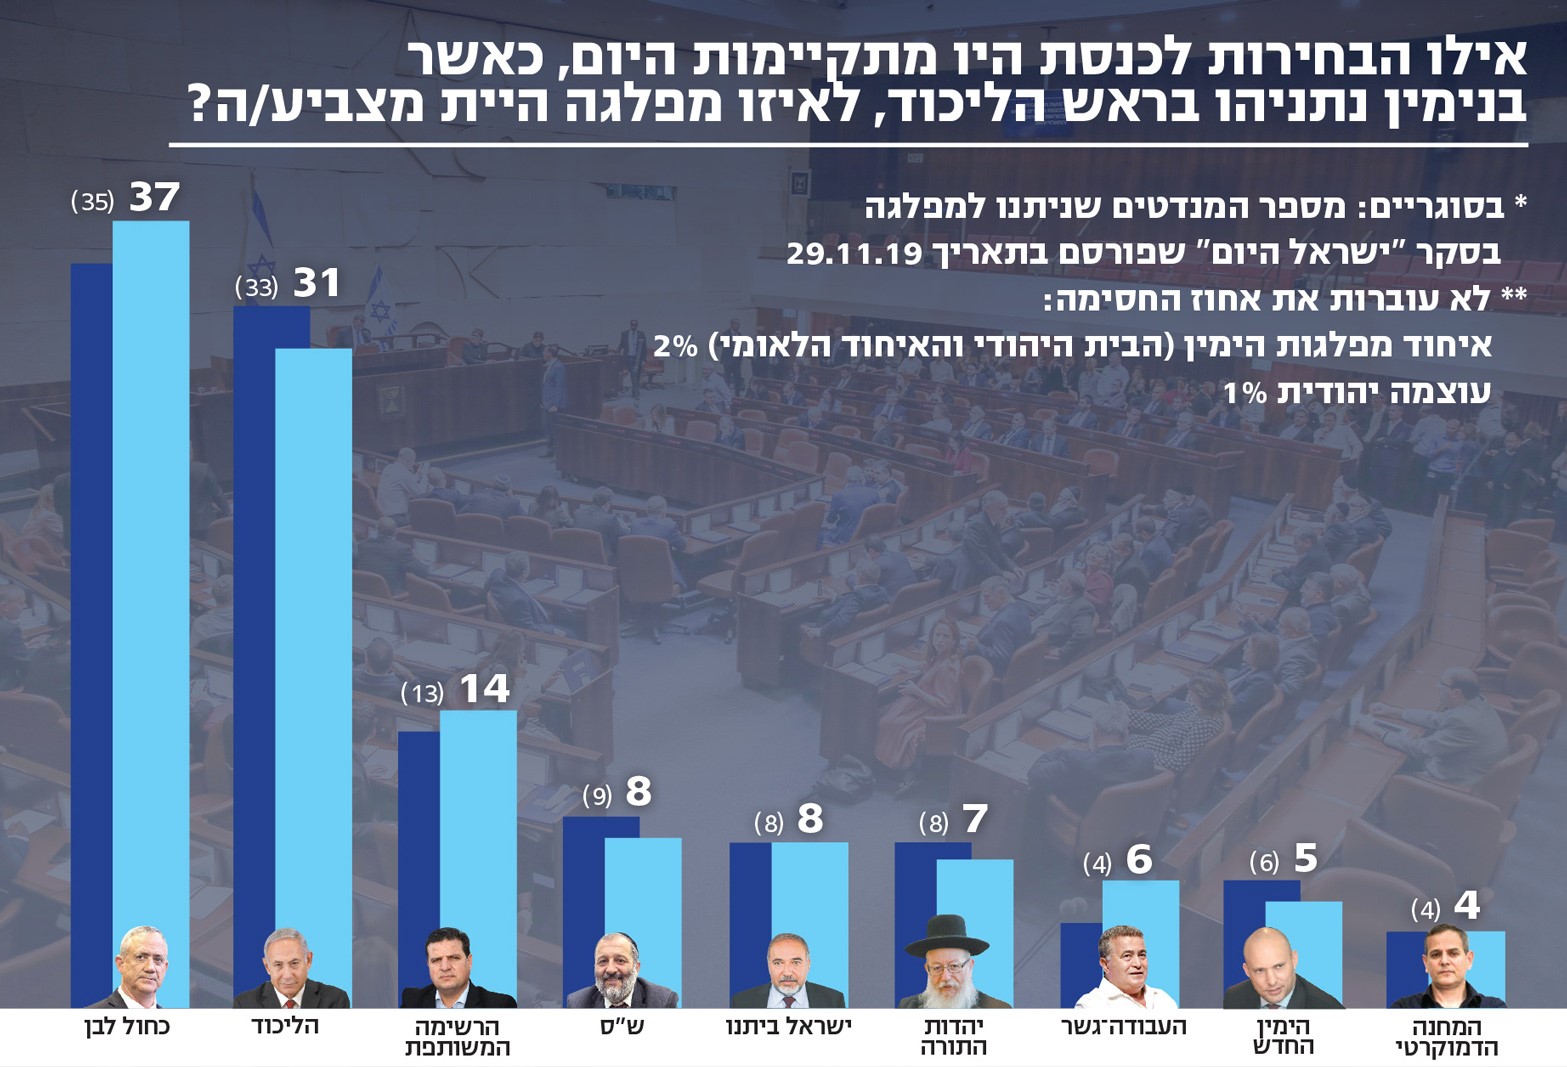 The poll published on Friday, December 13, by Israel Hayom: "If the Knesset elections were held today, with Benjamin Netanyahu at the head of the Likud, for which party would you vote?" From left to right appear the results for the nine parties that would enter the 23rd Knesset: Blue & White, Likud, The Joint List, Shas, Yisrael Beytenu, United Torah Judaism, Labor-Gesher and The Democratic Camp. *In parentheses are the number of seats given by the Israel HaYom poll conducted on November 29, 2019. **Parties that [according to the poll] won't pass the electoral threshold [3.25%]: Union of Rightist Parties (Jewish Home-National Union) 2%; Otzma Yehudit (Jewish Strength) 1%.